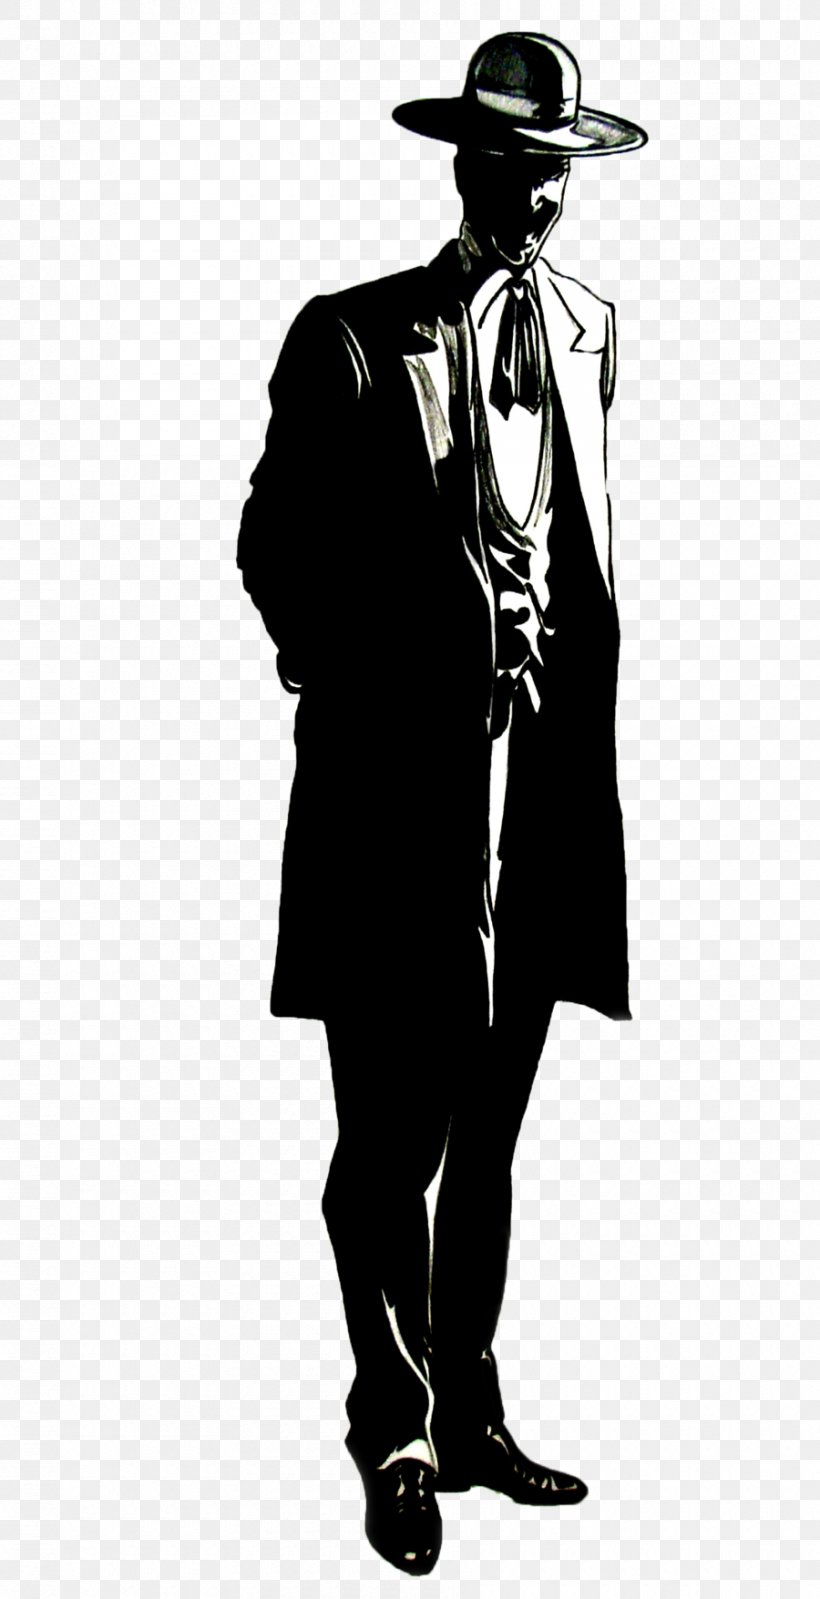 Tuxedo Silhouette, PNG, 900x1755px, Tuxedo, Black And White, Costume, Costume Design, Formal Wear Download Free